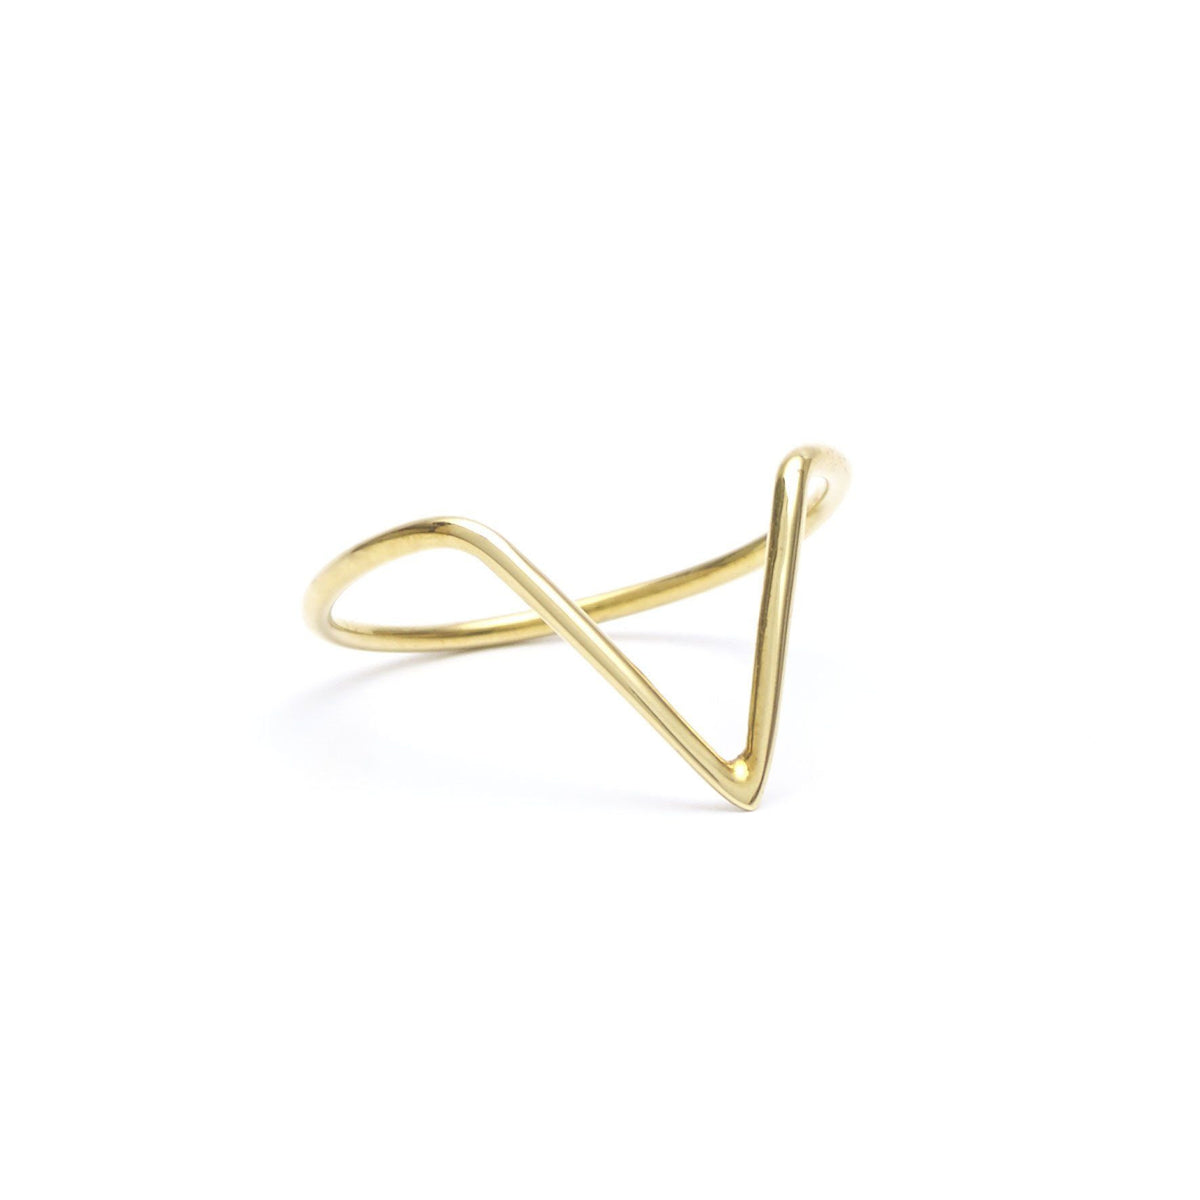 Brass jewelry handmade V ring, minimalist rings in a minimalist jewelry collection.